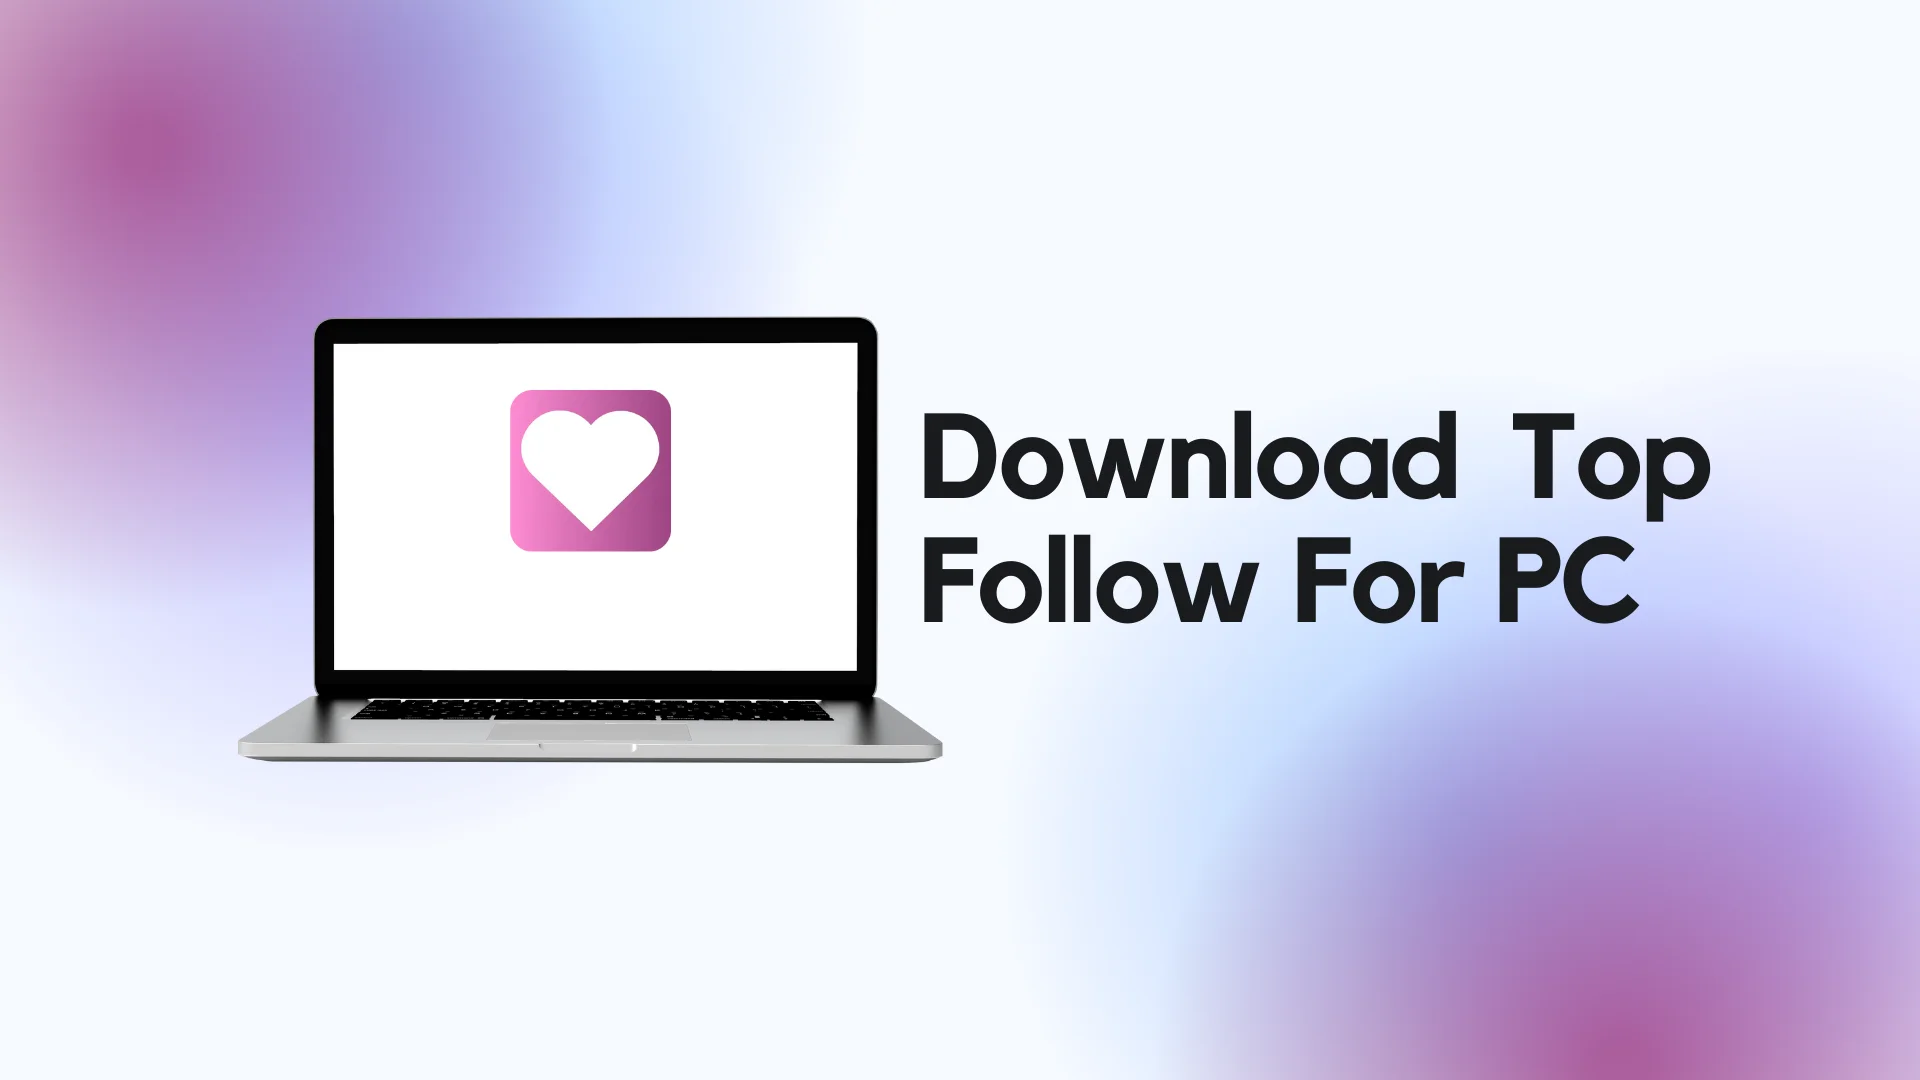 Download Top Follow For PC